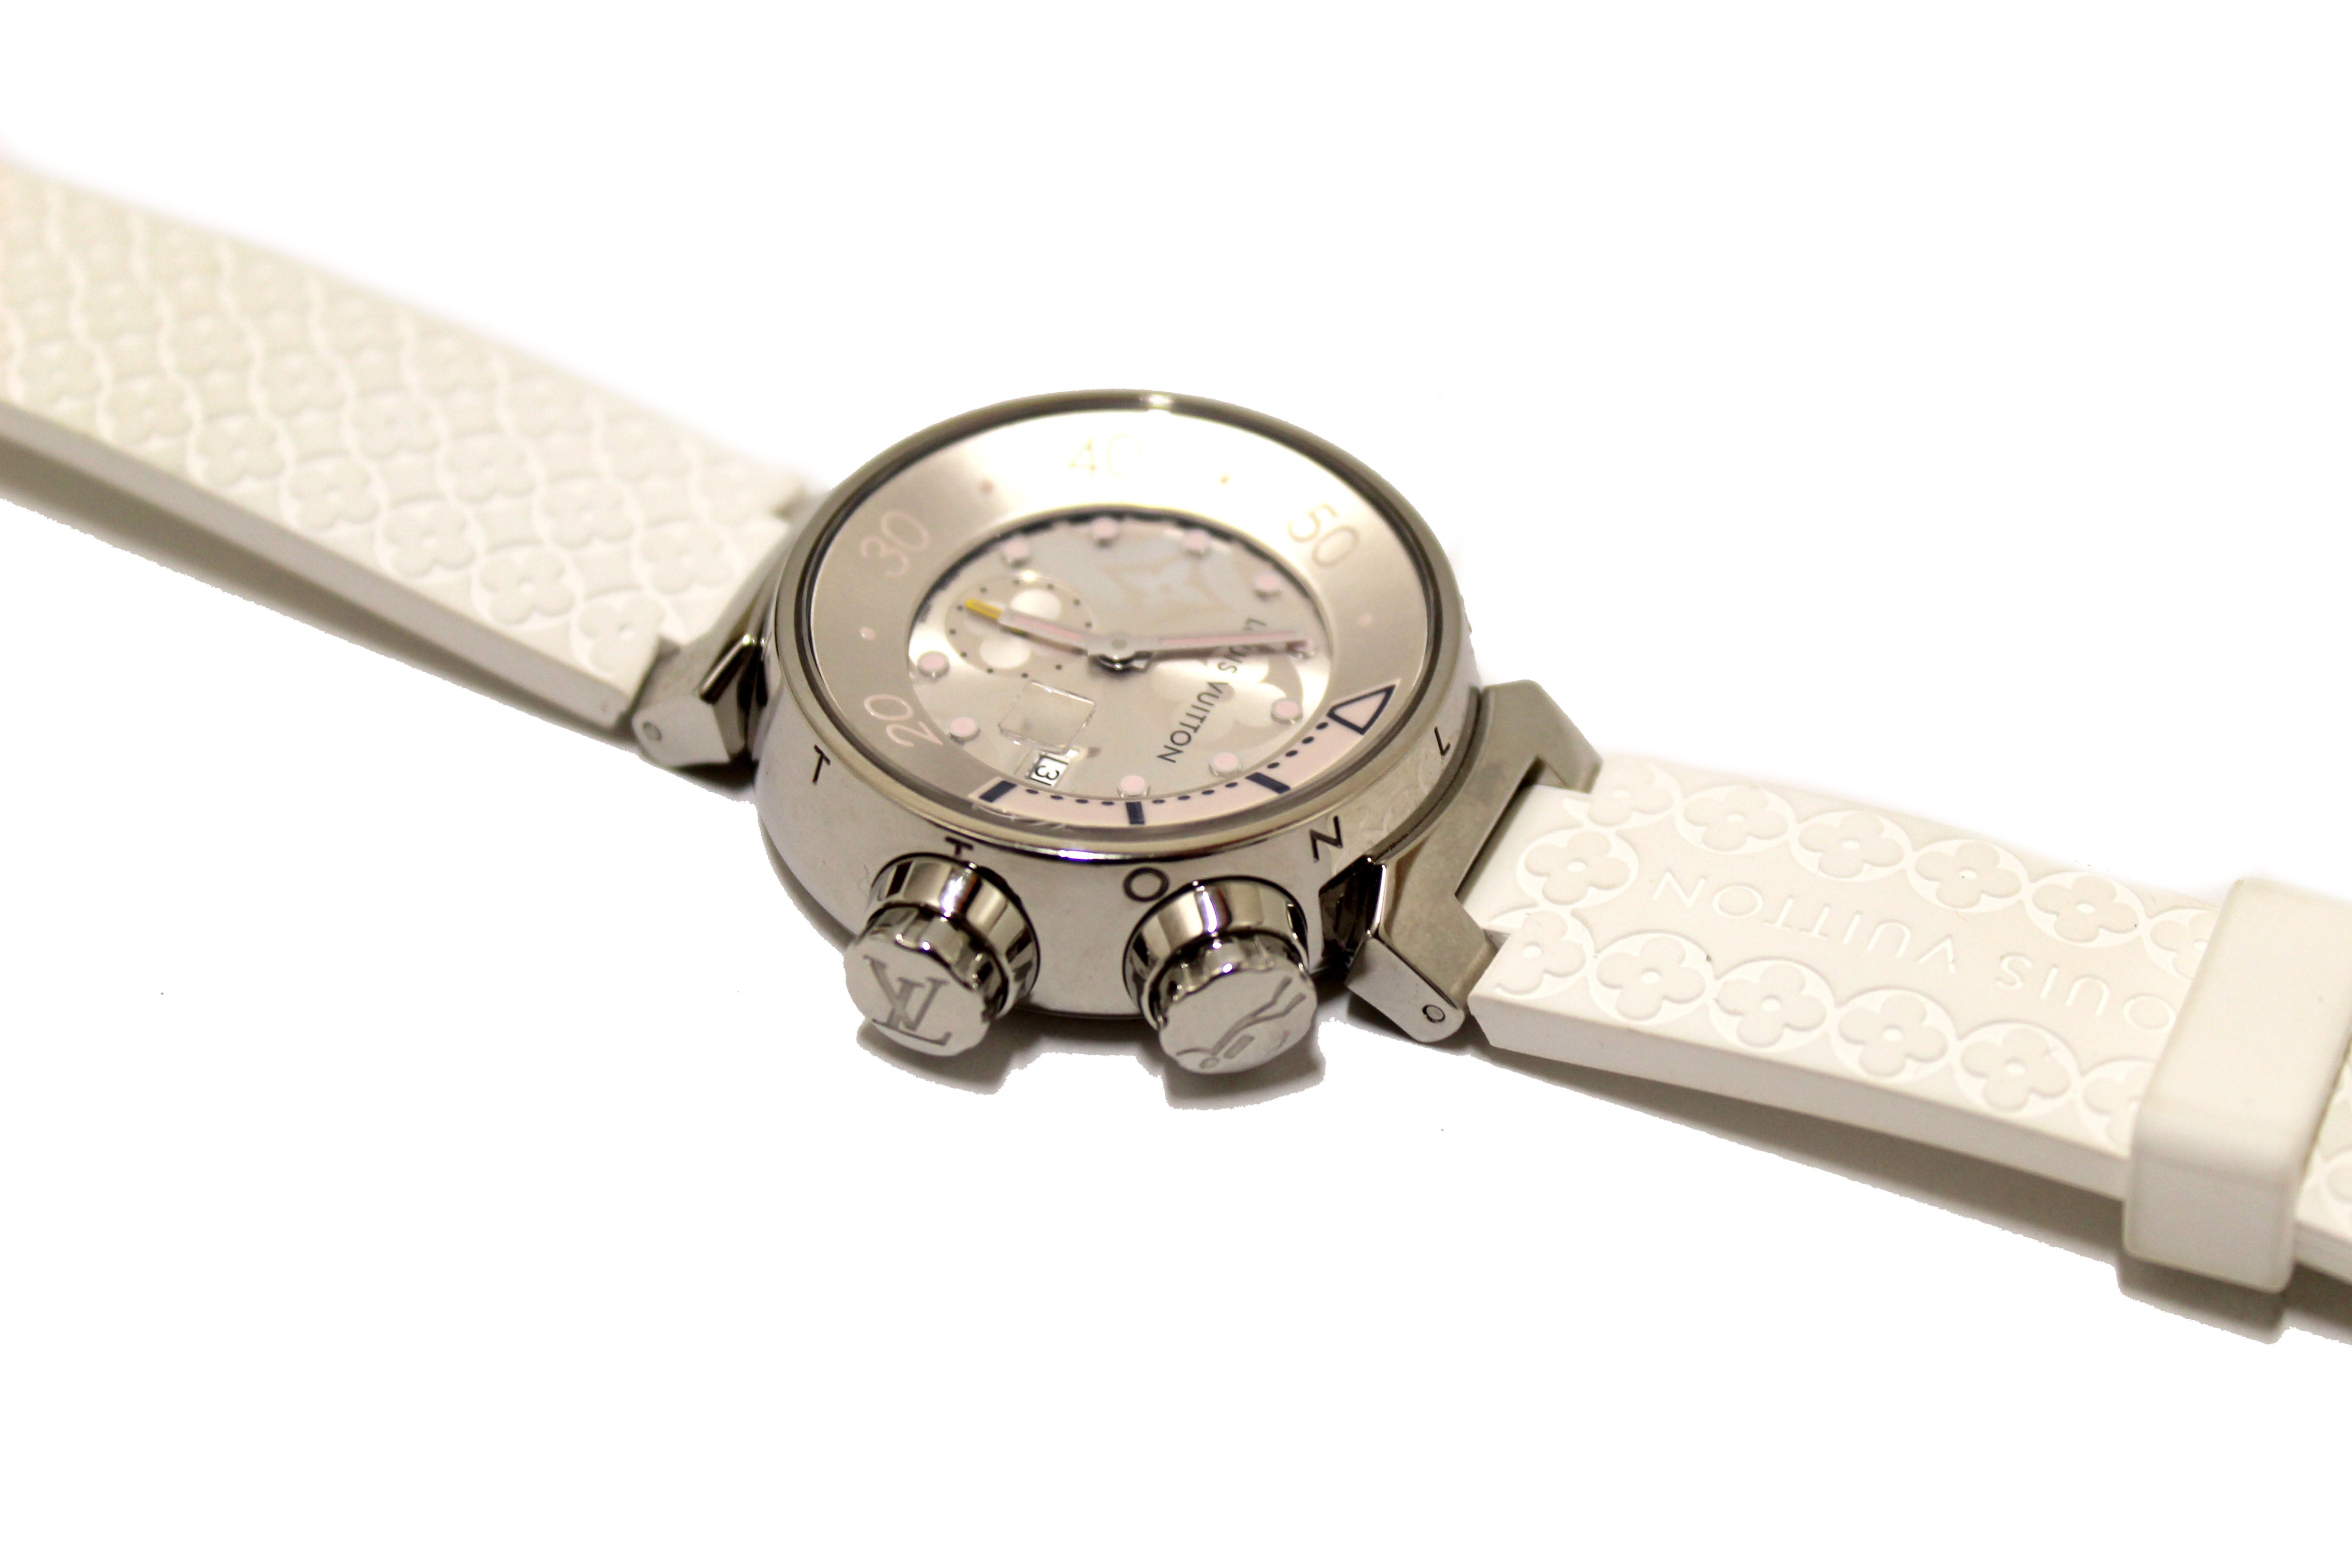 Authentic Louis Vuitton White Lovely Cup Chronograph Watch